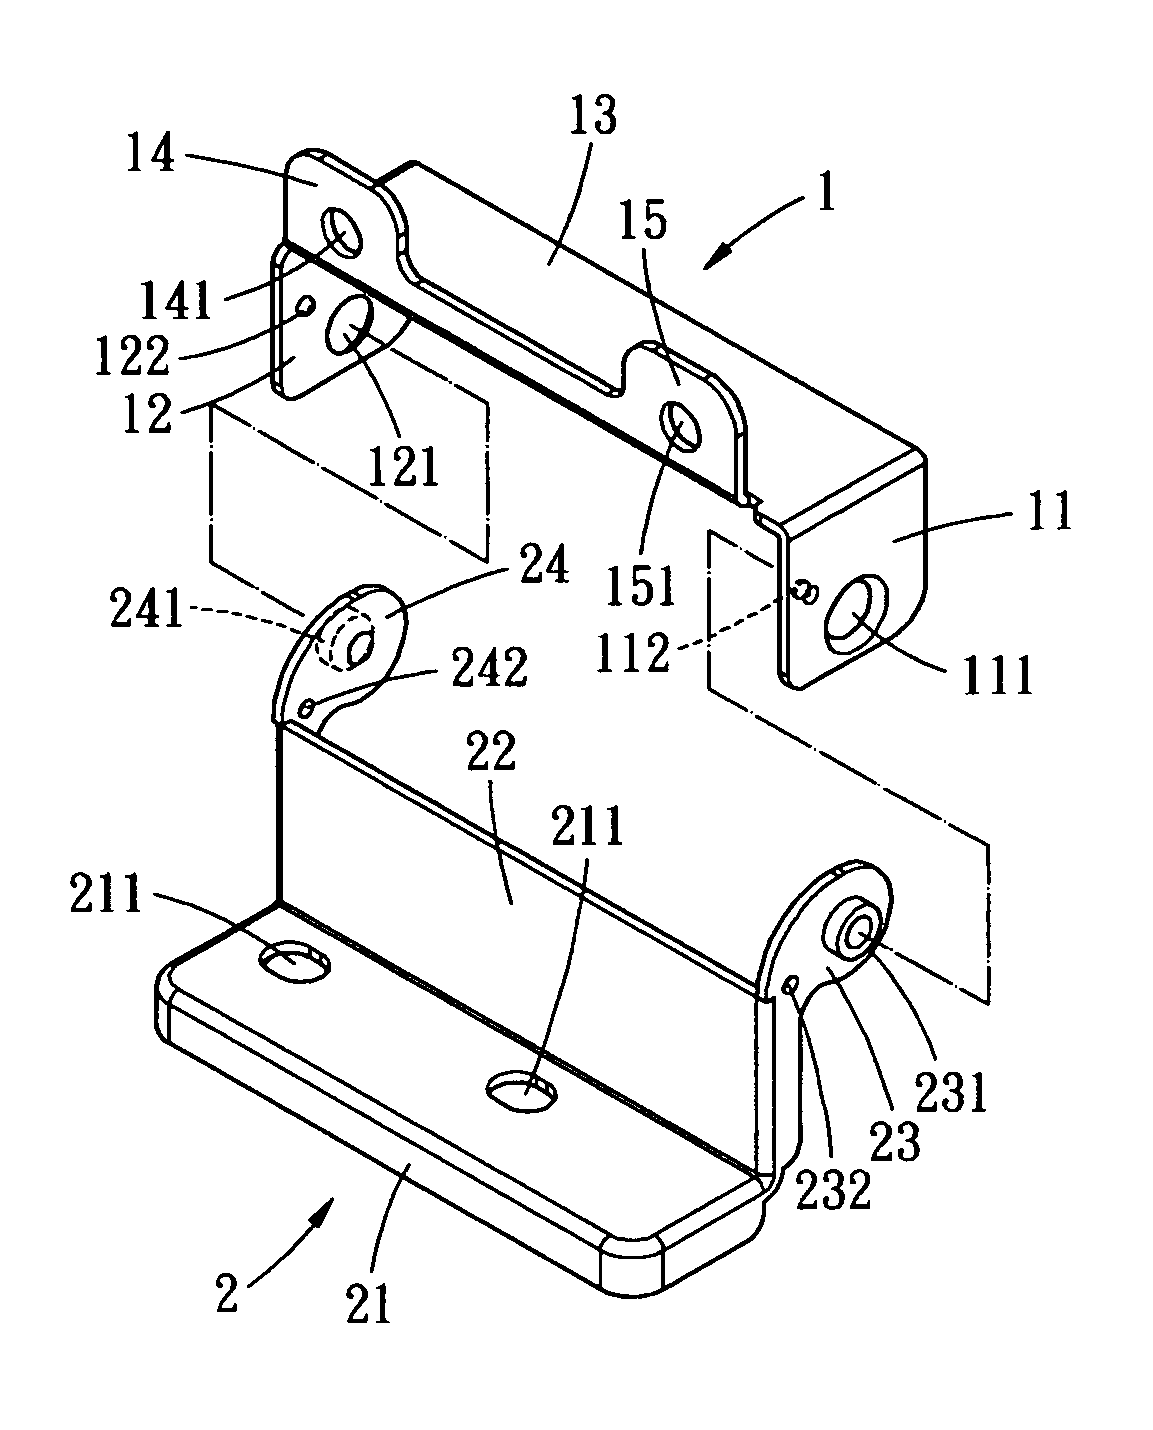 Lift-type positioning structure for bracket of computer interface card